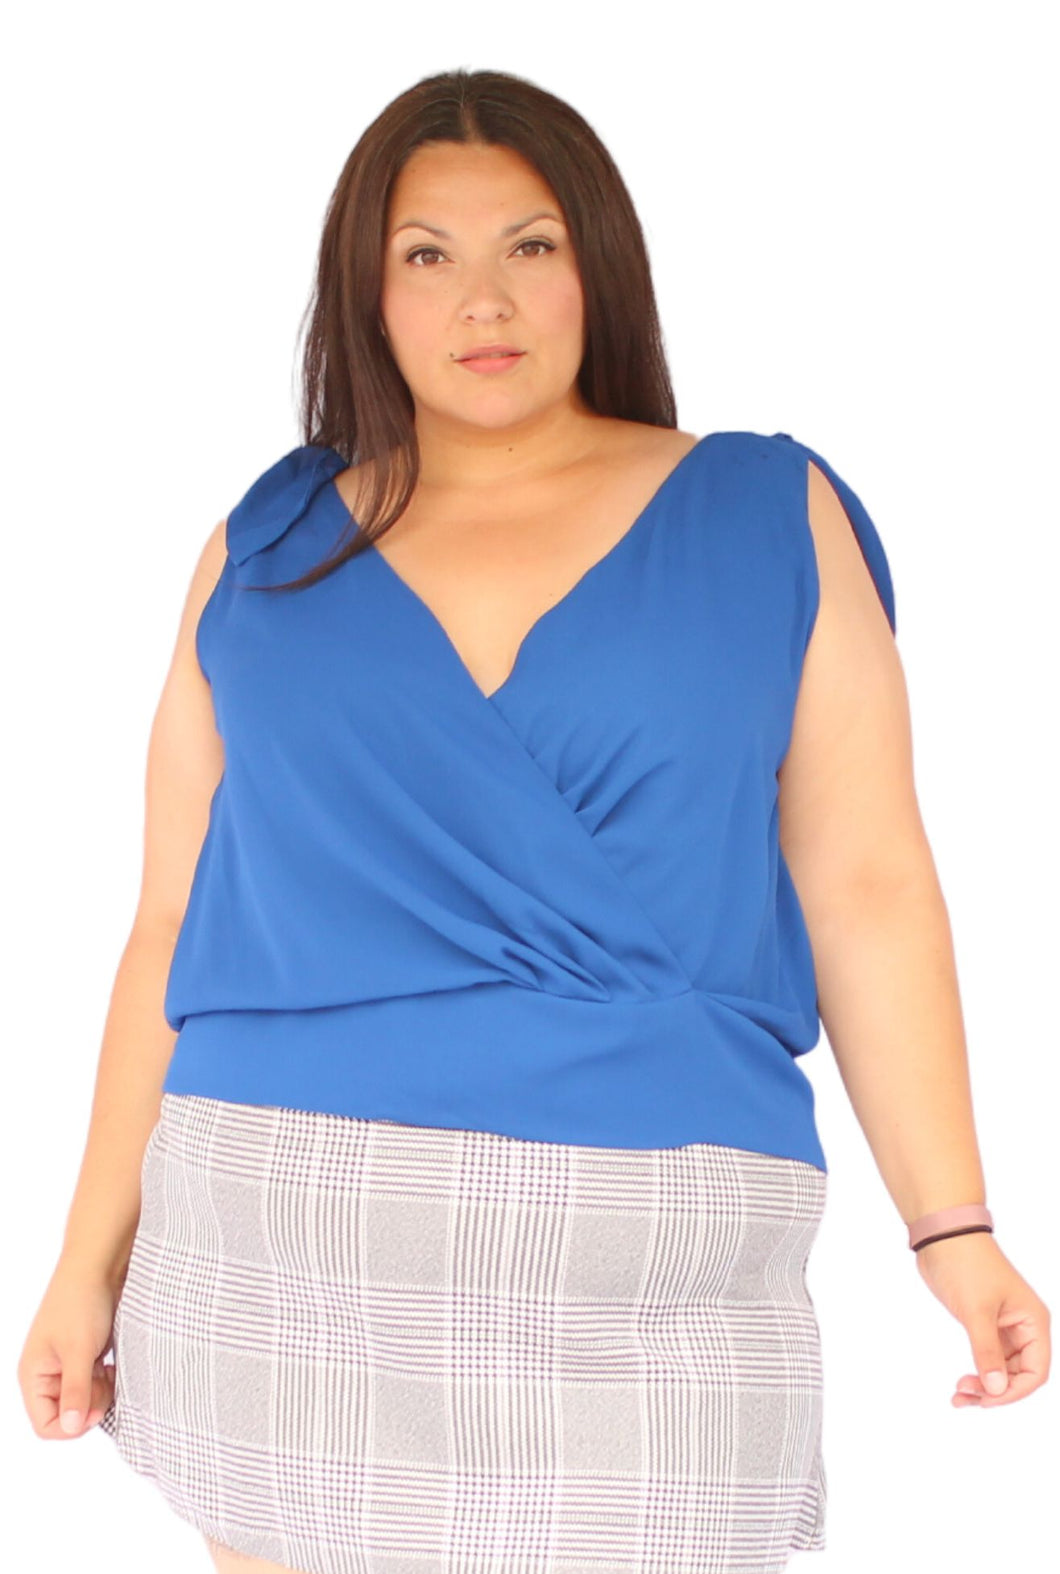 Fashion to Figure Blue Tank with Shoulder Tie, Size 2